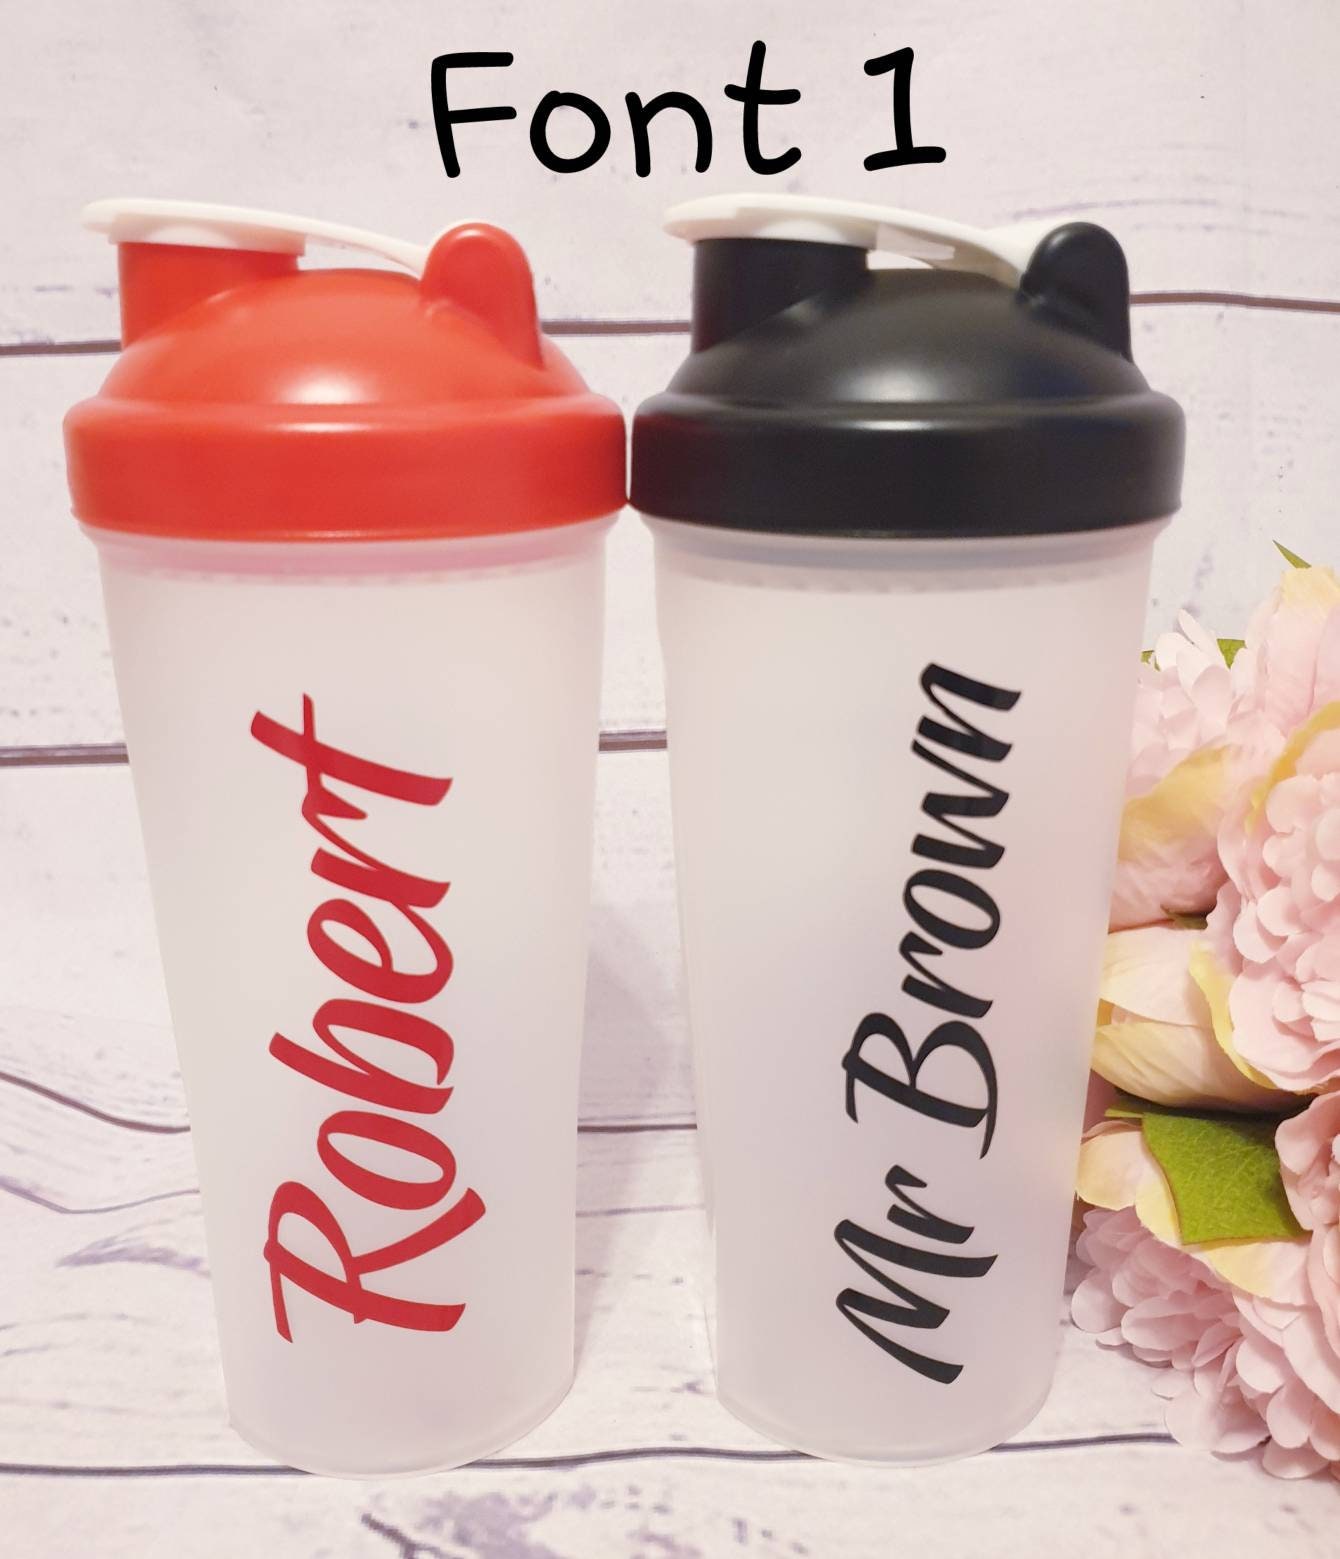 Personalised 700ml Protein Red Black Shaker Bottle Smoothie Gift Gym  Workout Present Birthday Sports Weight Loss Surgery Measure Mixer Ball 